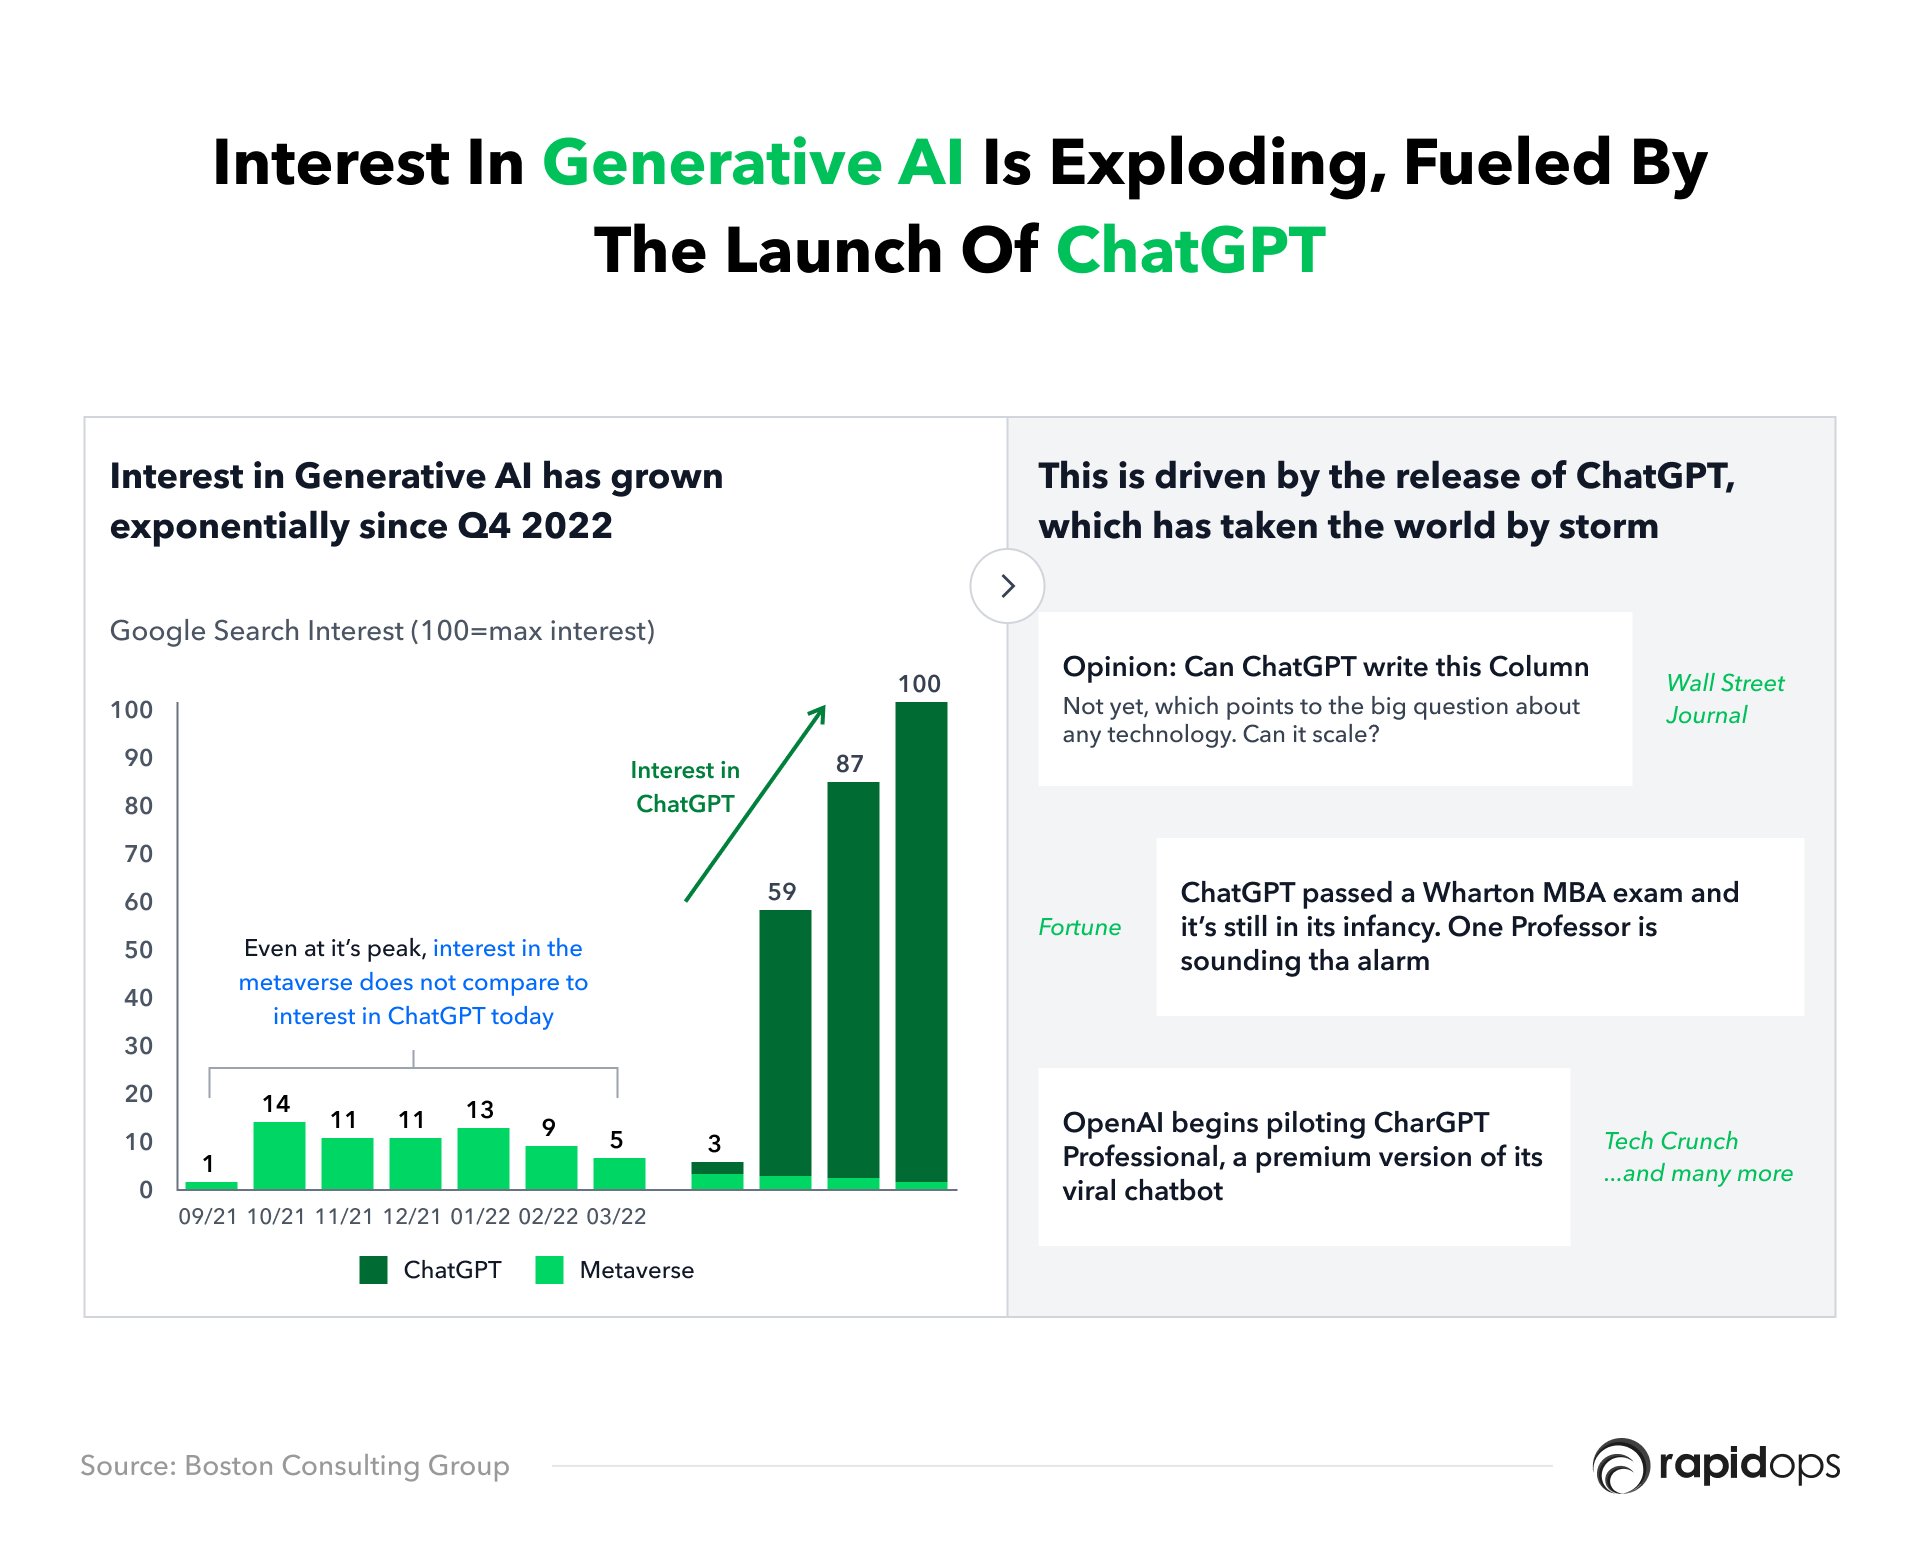 Interest in Generative AI is exploding, fueled by the launch of ChatGPT